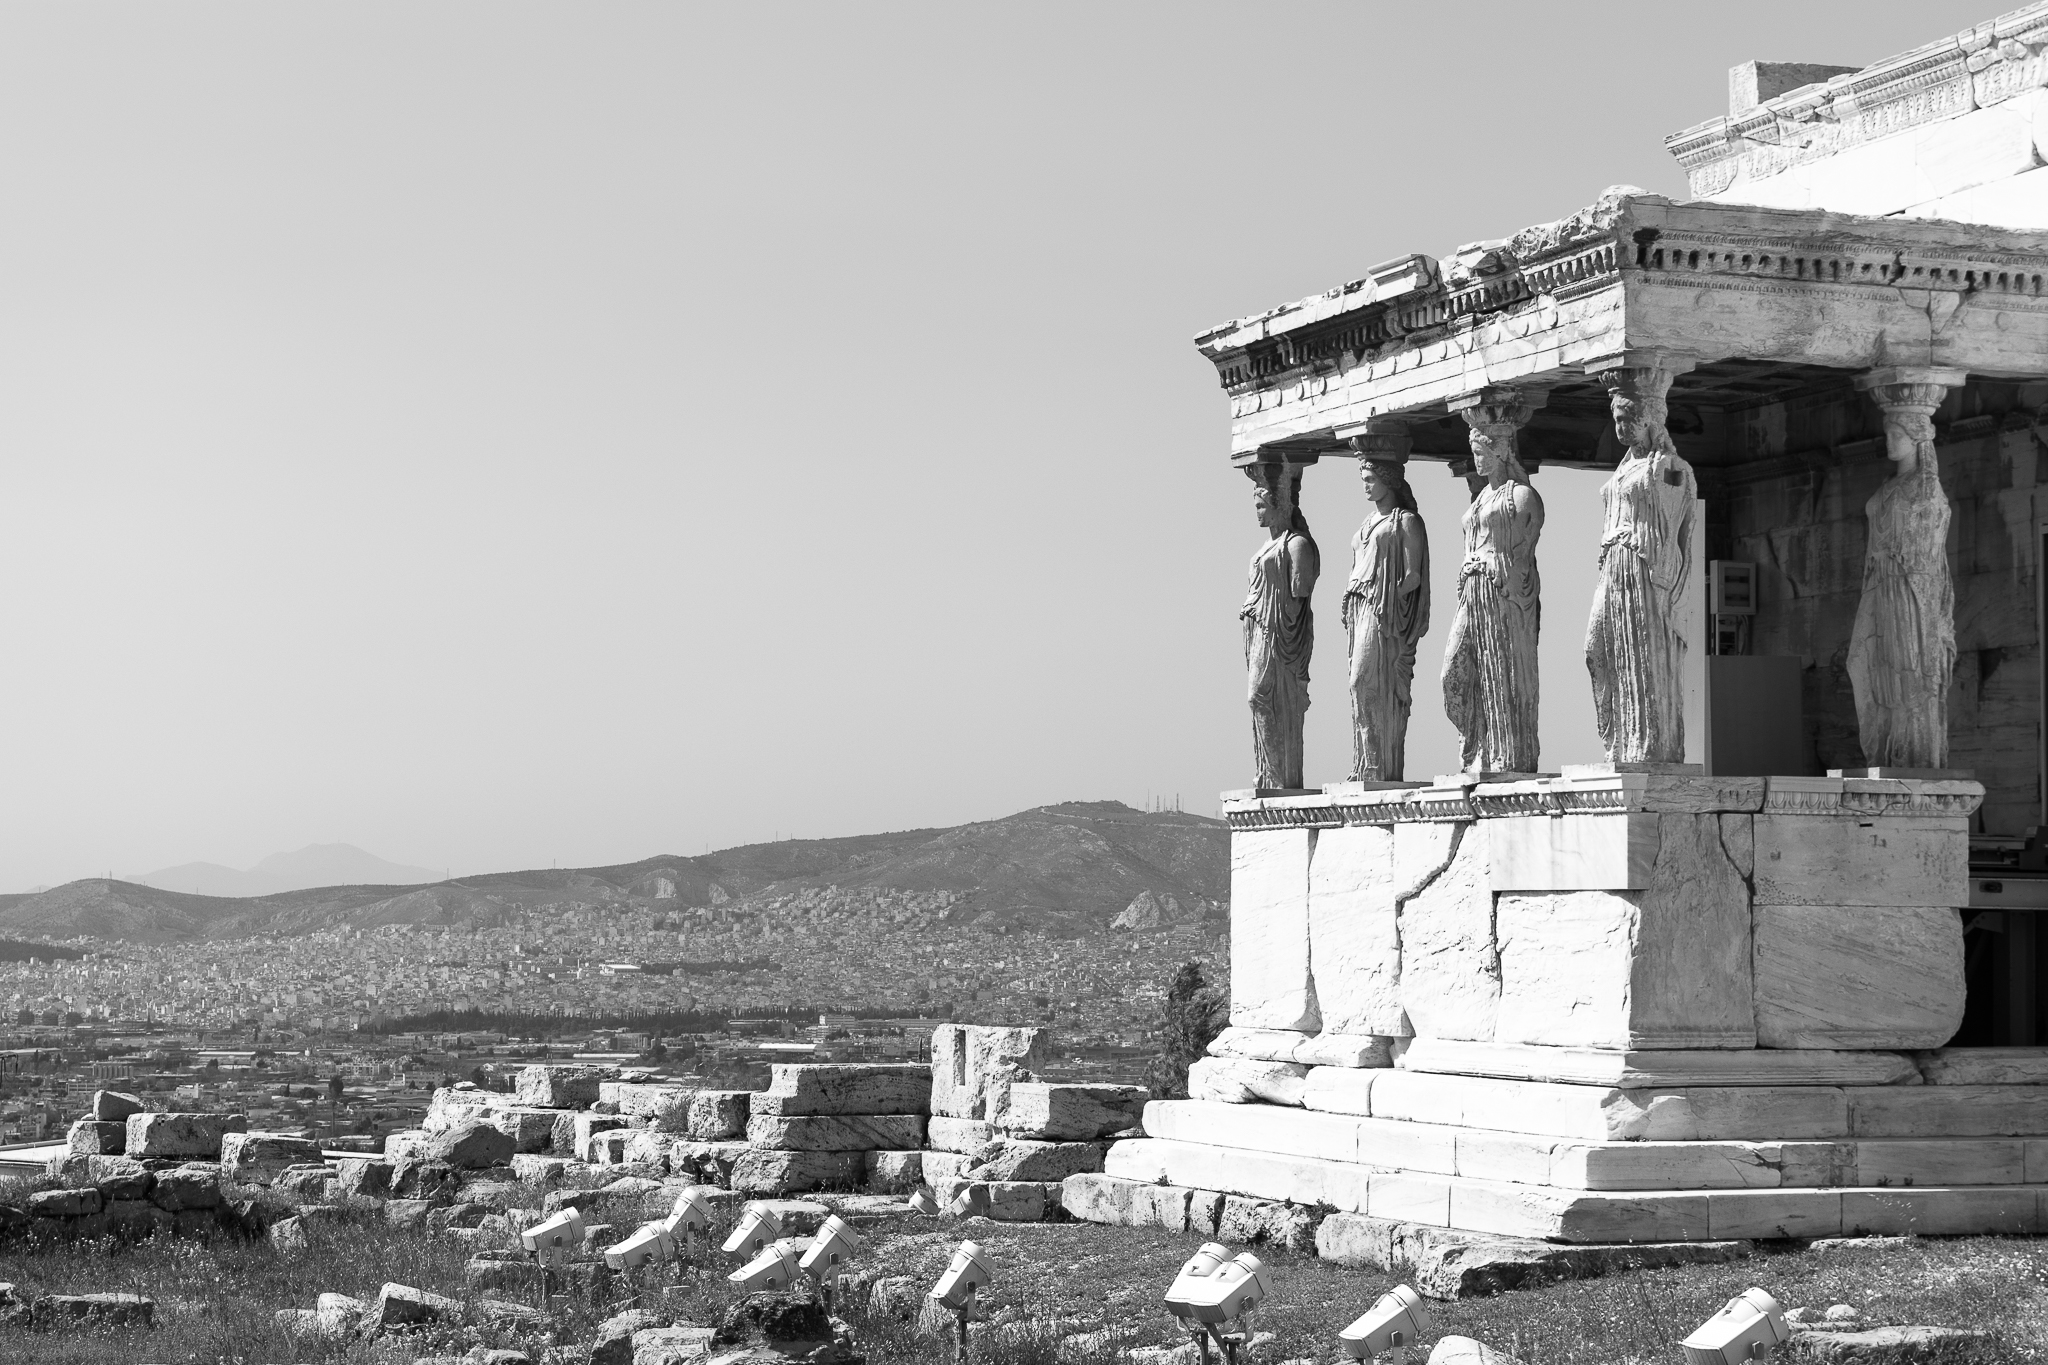 Located in front of the Parthenon and in the southern part of the Erechtheum, the Porch of the Caryatids consists of six columns of more than two meters height in the shape of women who are called caryatids. These are said to have collaborated with the Persian invaders during the 5th century BC. thus metaphorically they are made to carry the weight of the temple.